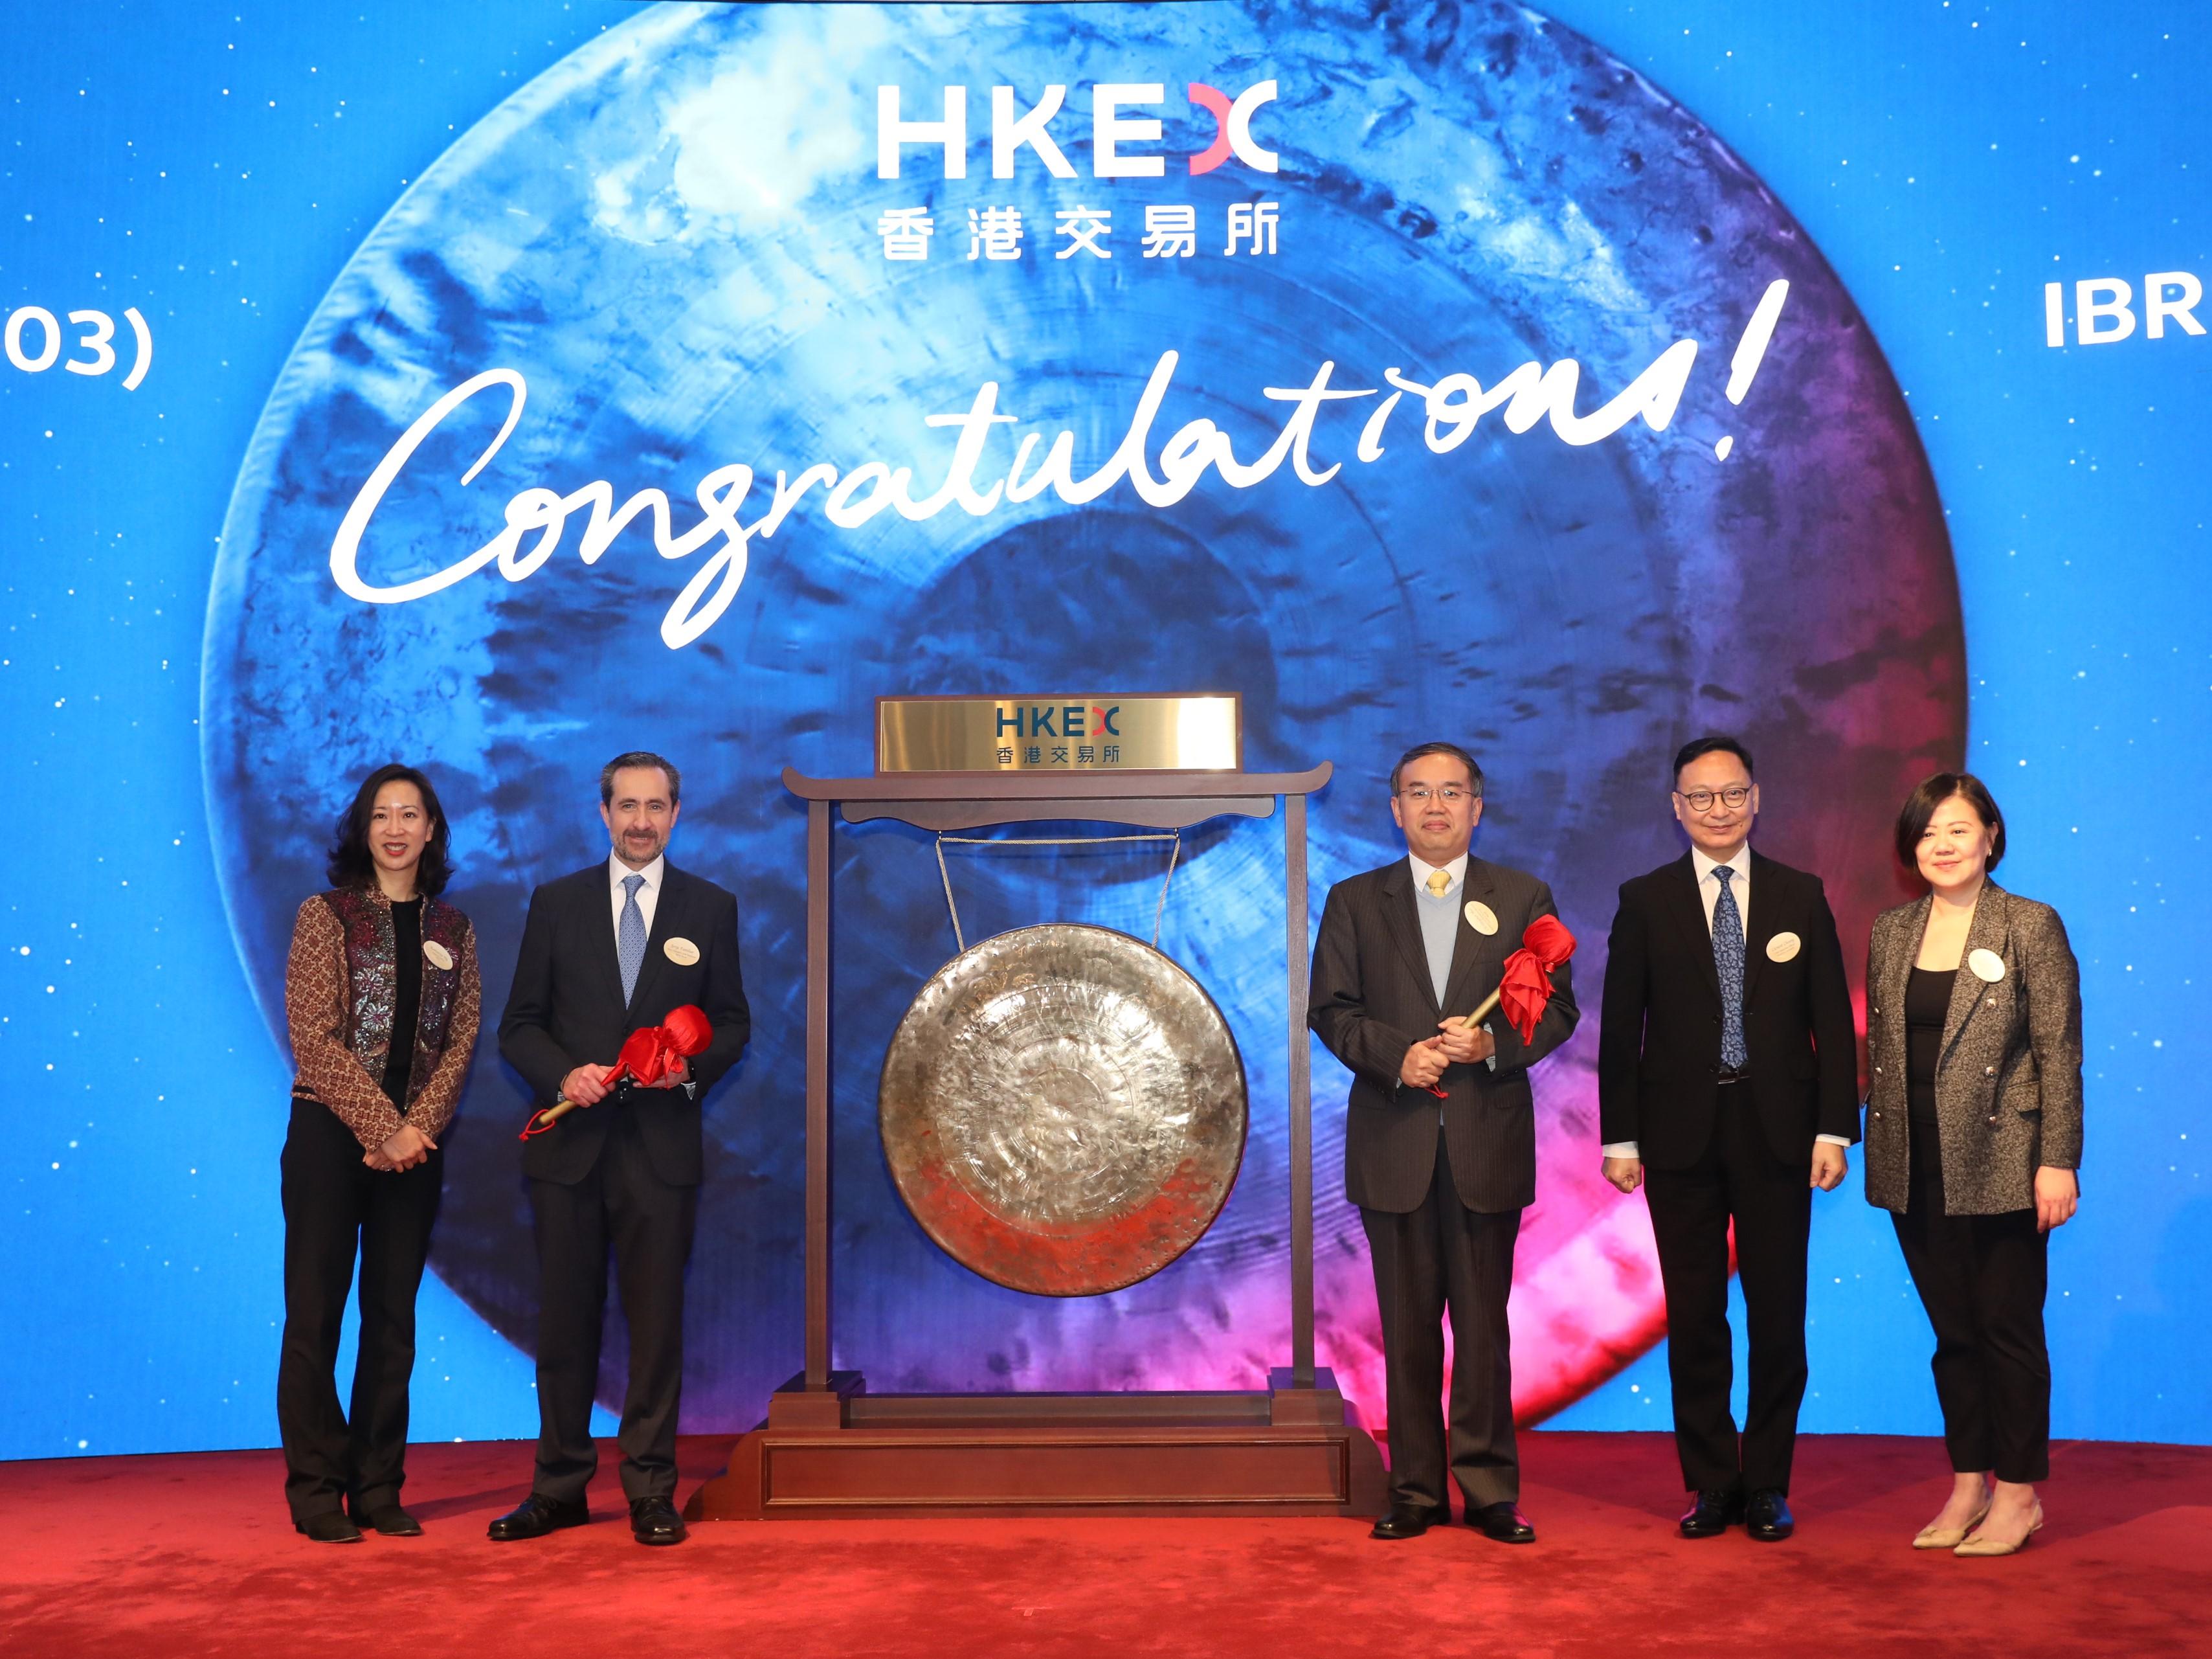 A gong-strike ceremony was held today (March 28) at the Hong Kong Exchanges and Clearing Limited (HKEX) to mark the inaugural insurance-linked securities listing with the presence of officiating guests (from left): the Head of Listing of the HKEX, Ms Katherine Ng; the Vice President and Treasurer of the World Bank, Mr Jorge Familiar; the Secretary for Financial Services and the Treasury, Mr Christopher Hui; the Chief Executive Officer of the Insurance Authority, Mr Clement Cheung; and the Group Head of Emerging Business and FIC of the HKEX, Ms Glenda So.